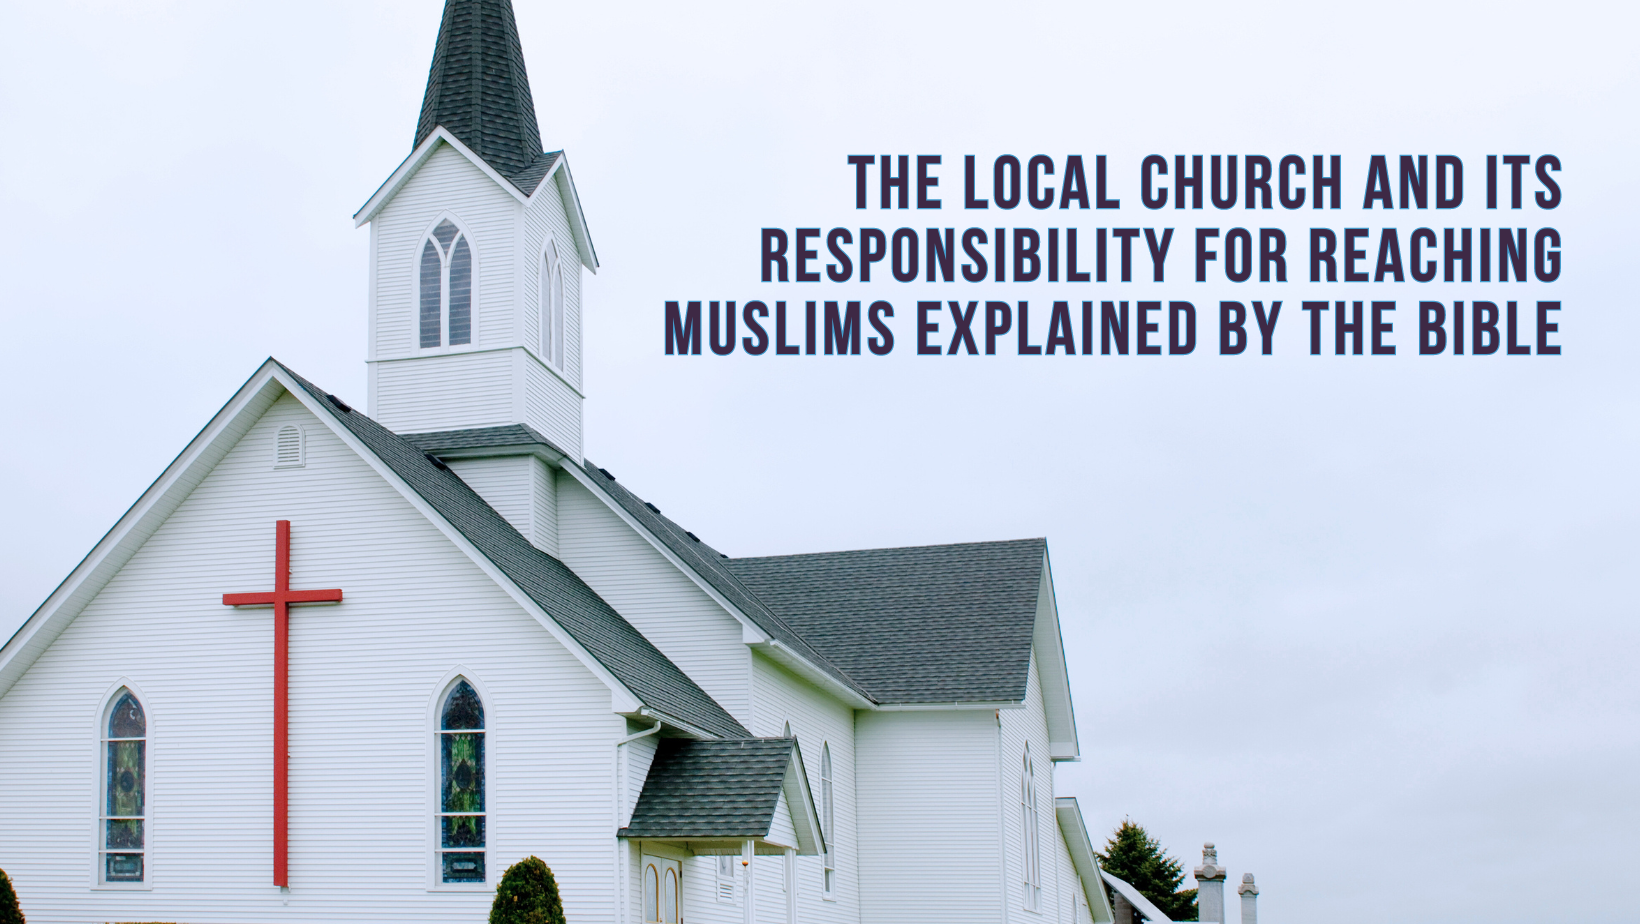 The local church and its responsibility for reaching Muslims explained by the Bible